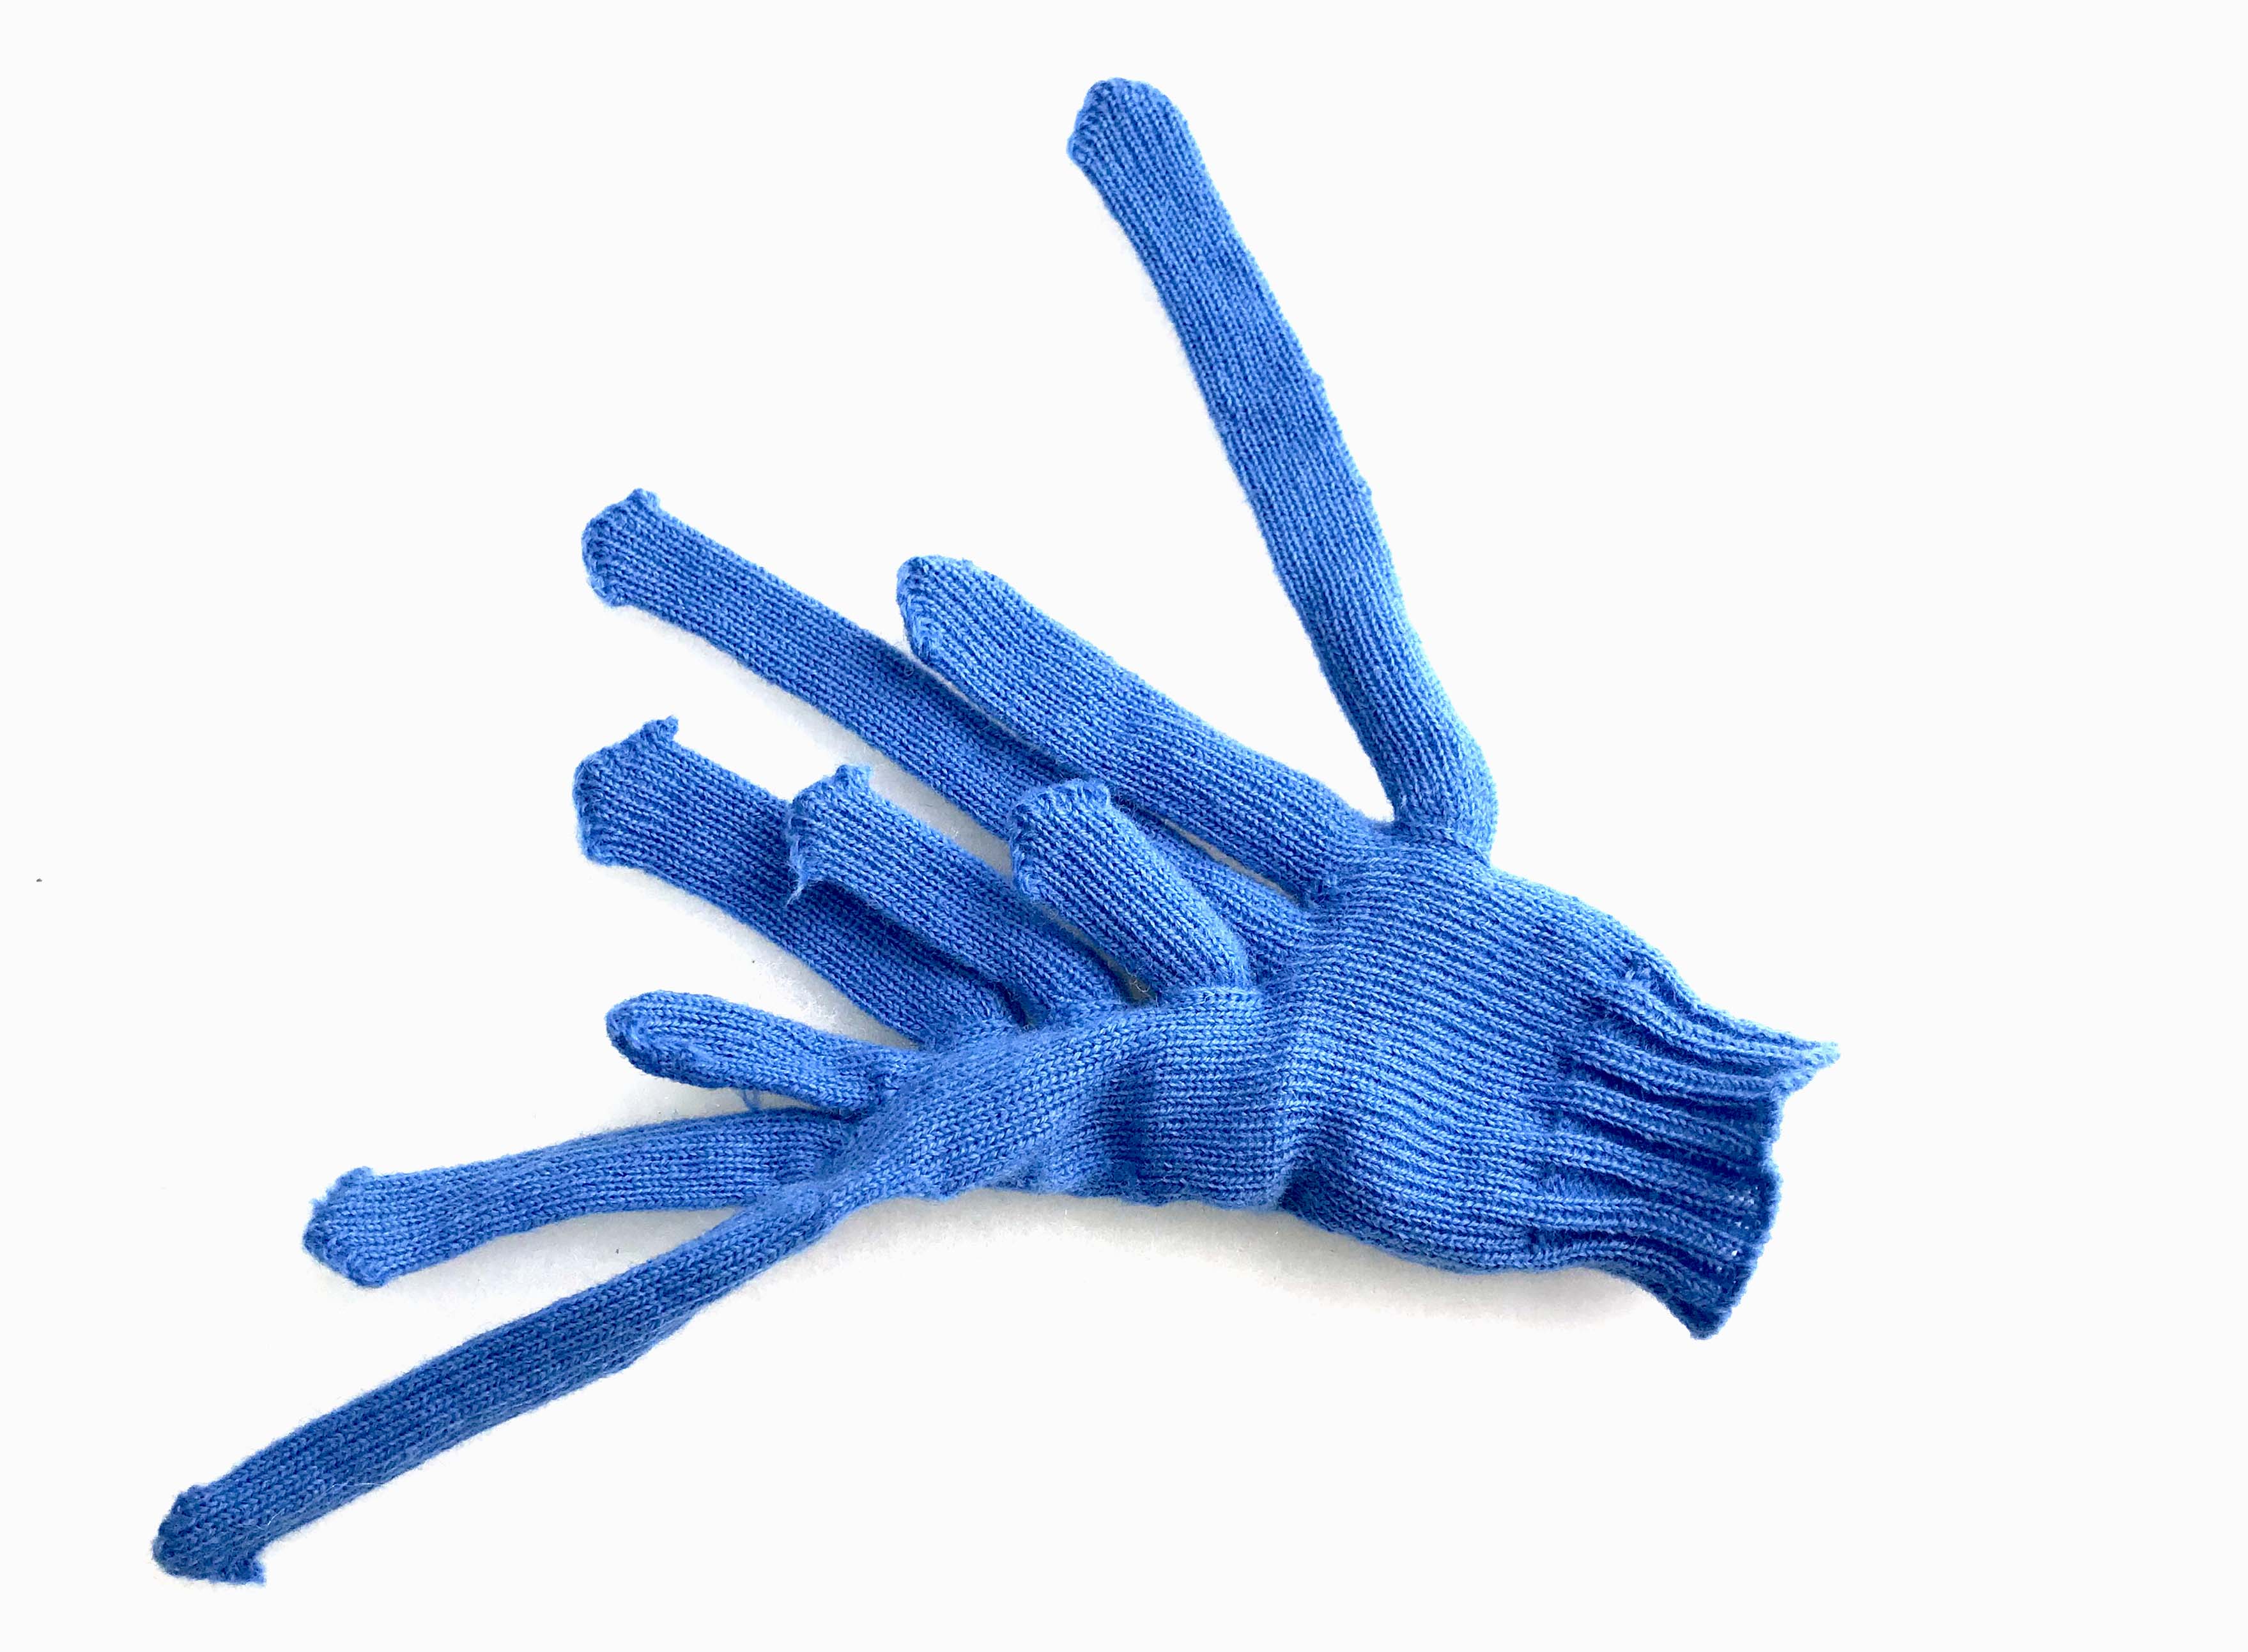 Another glove with slightly too many fingers and thumbs.